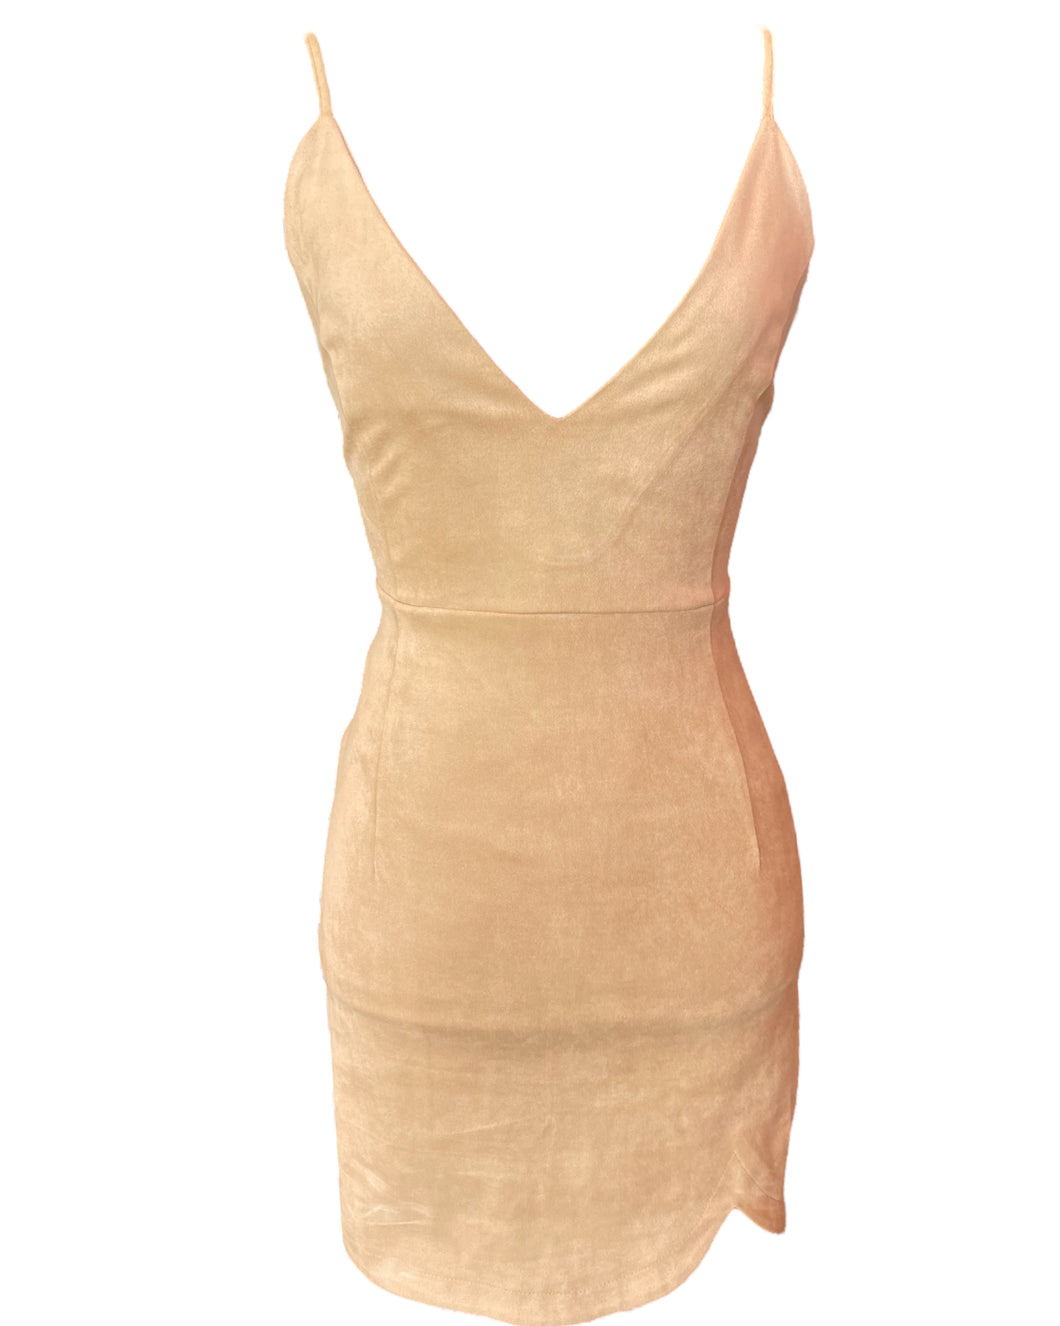 NWT Forever 21 Suede Dress • L